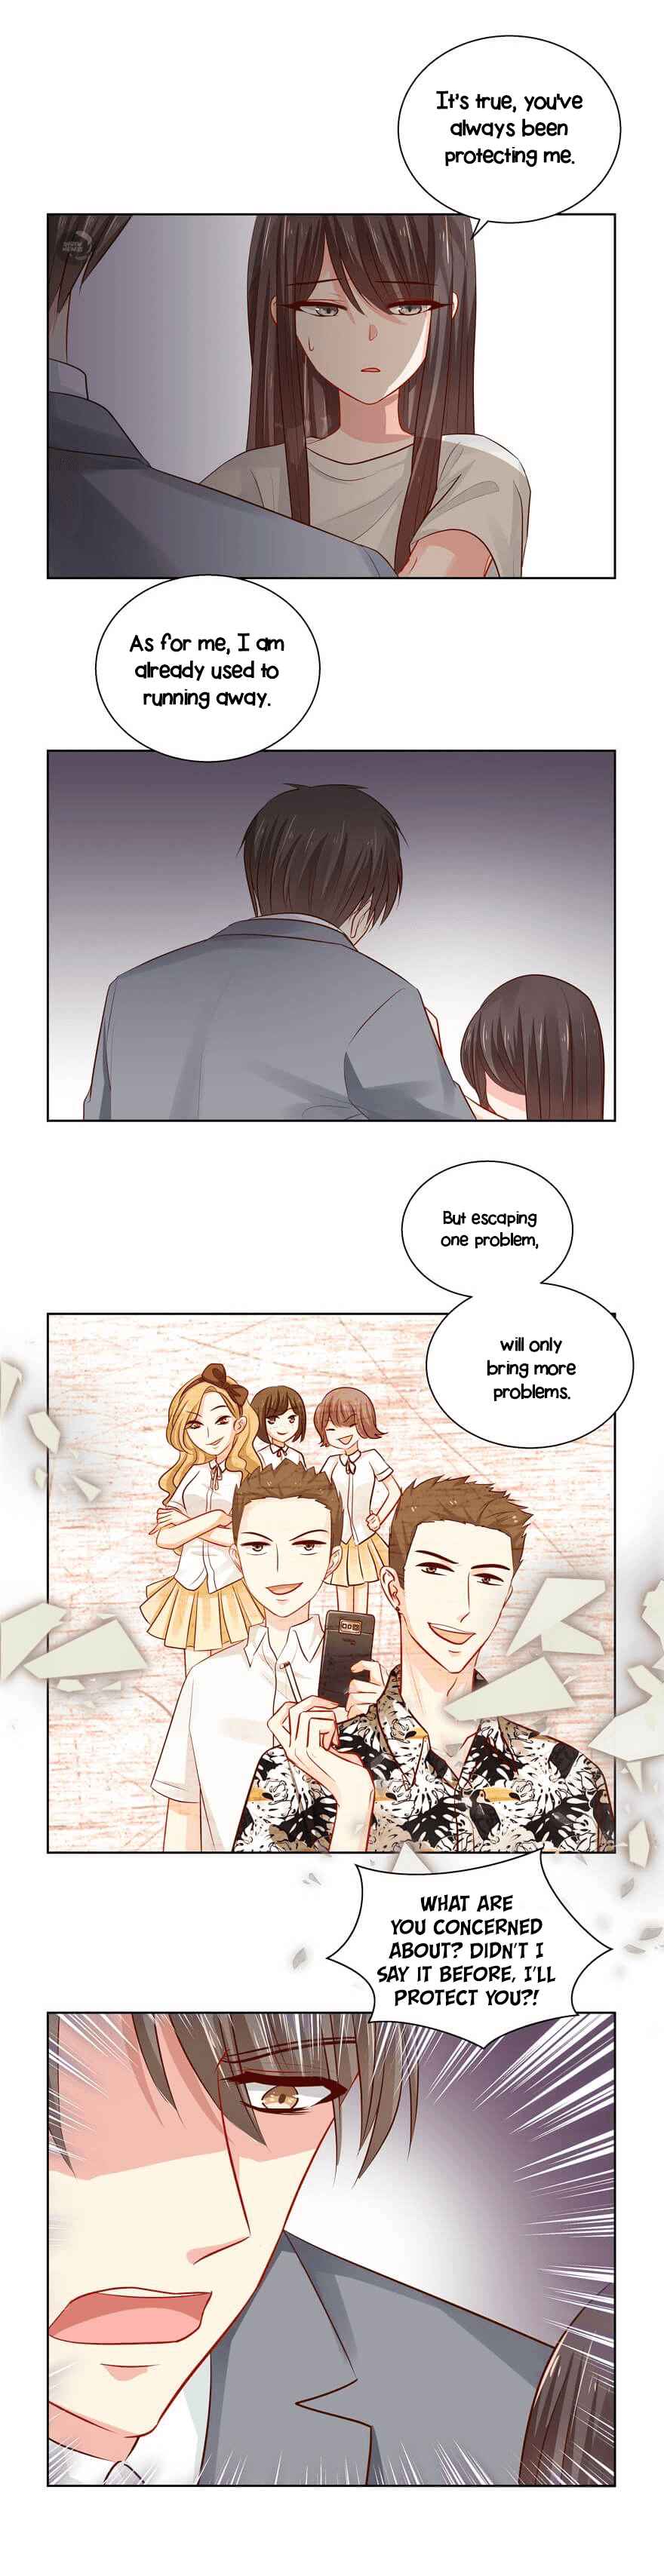 Reluctant To Go Ch. 75 What's wrong with relying on me a bit more?